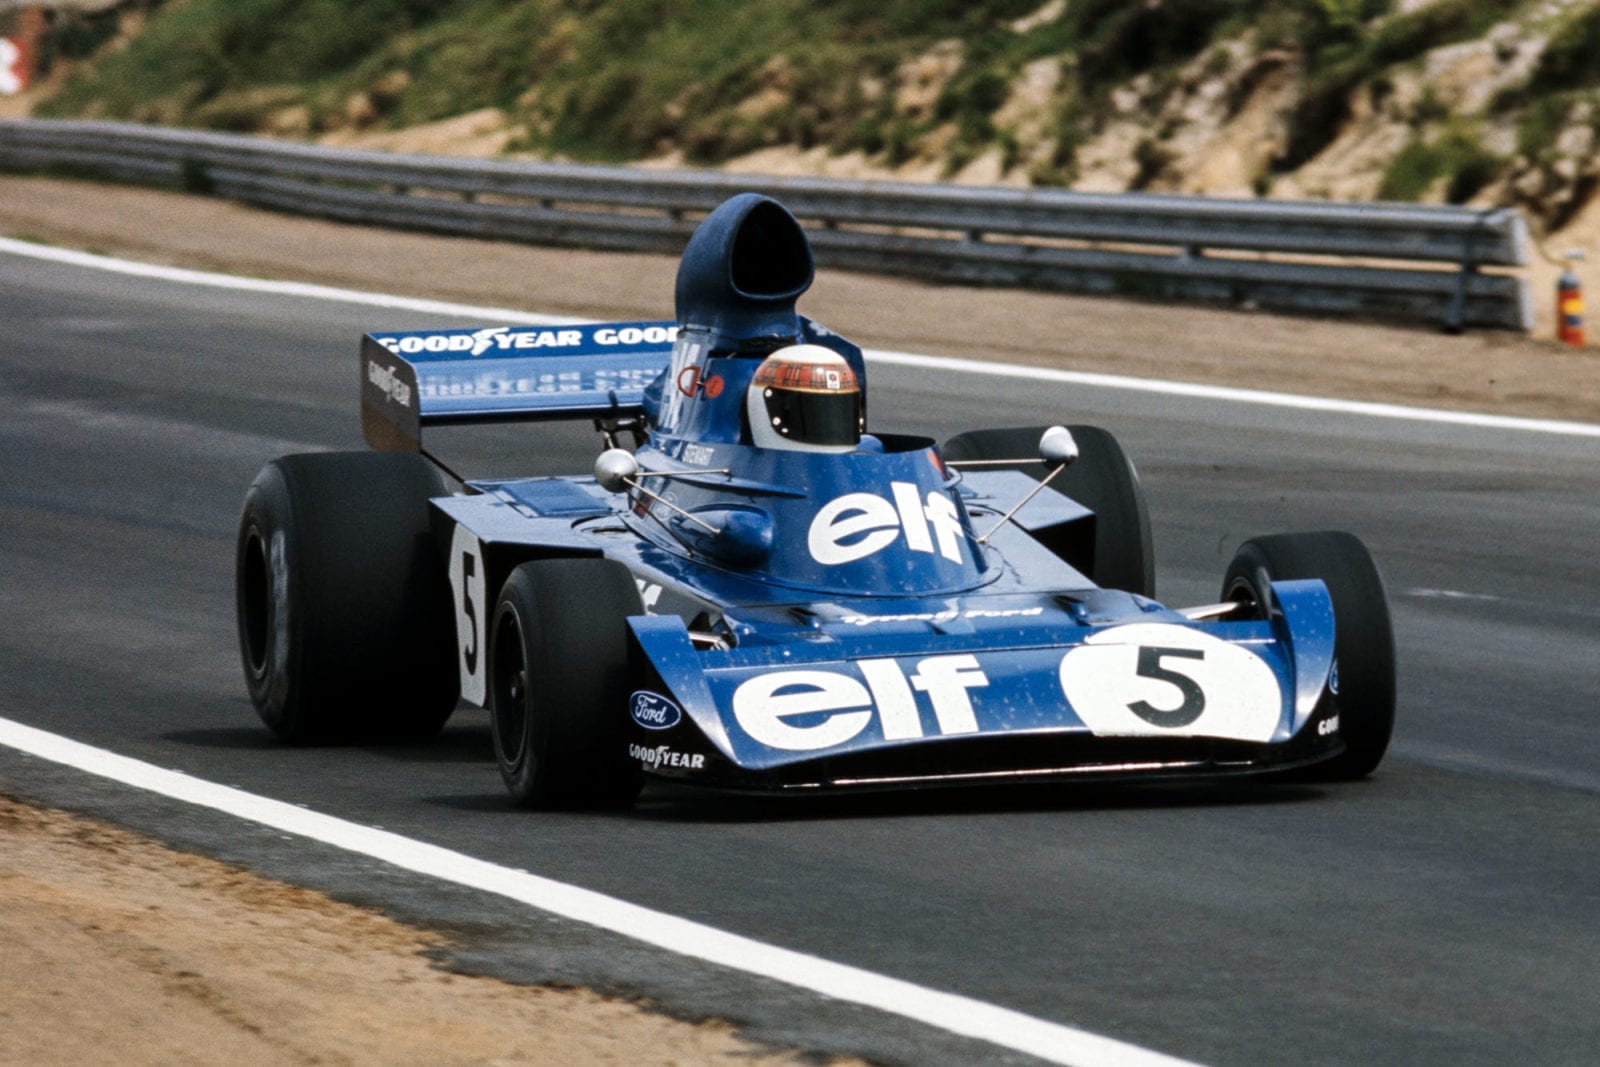 Jackie Stewart driving for Tyrrell at the 1973 Belgian Grand Prix